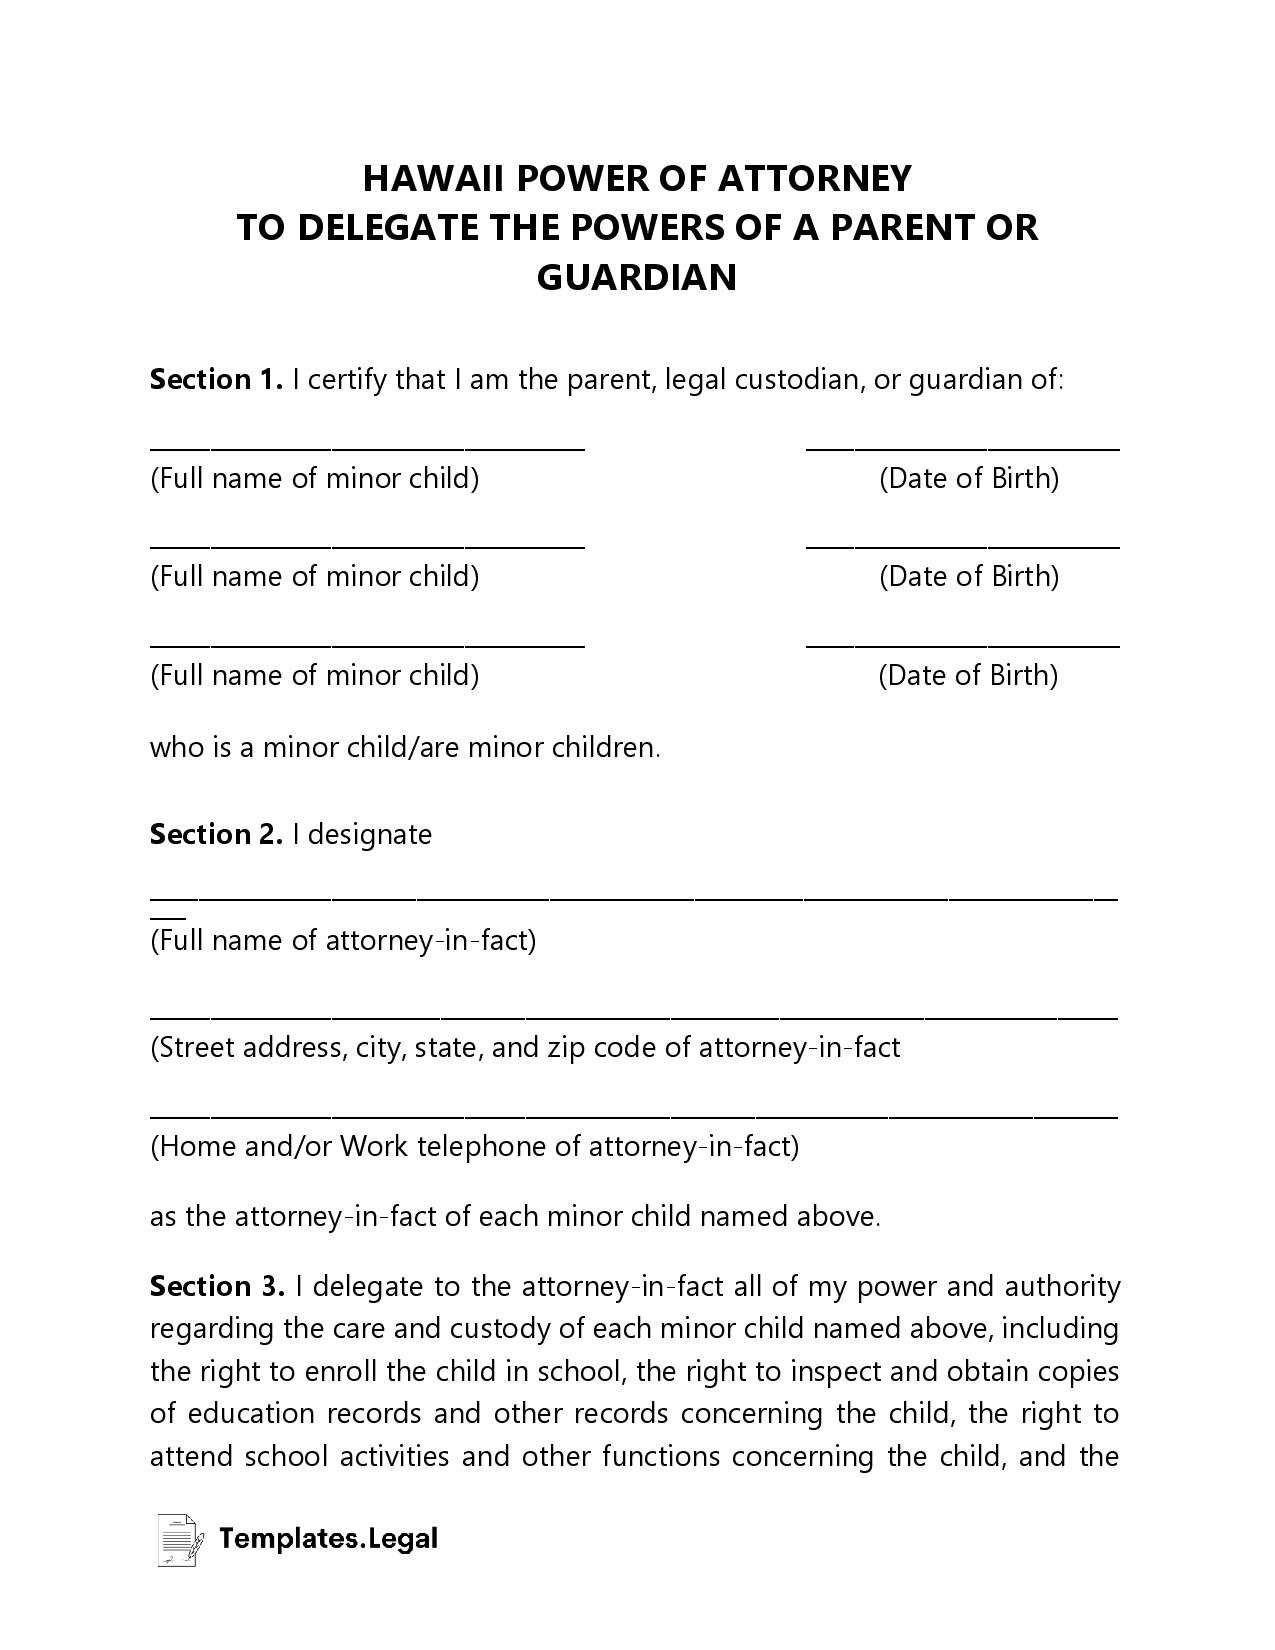 Hawaii Minor (Child) Power of Attorney - Templates.Legal